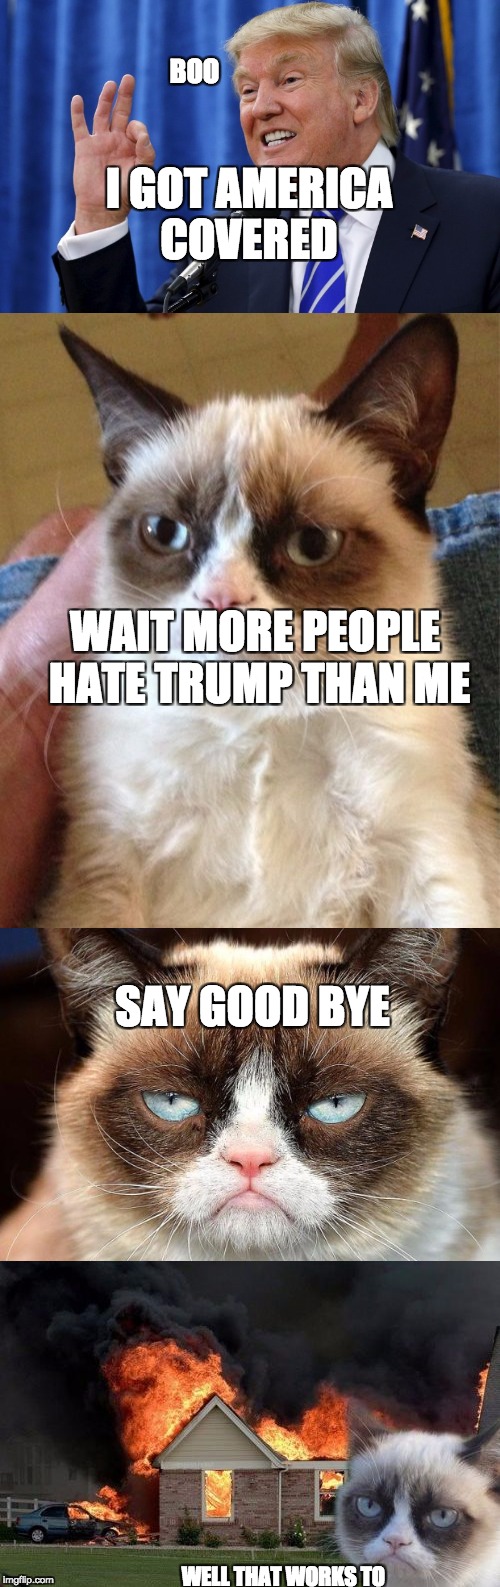 grumpy cat gets mad | I GOT AMERICA COVERED; BOO; WAIT MORE PEOPLE HATE TRUMP THAN ME; SAY GOOD BYE; WELL THAT WORKS TO | image tagged in funny memes,revenge,lol,grumpy cat | made w/ Imgflip meme maker